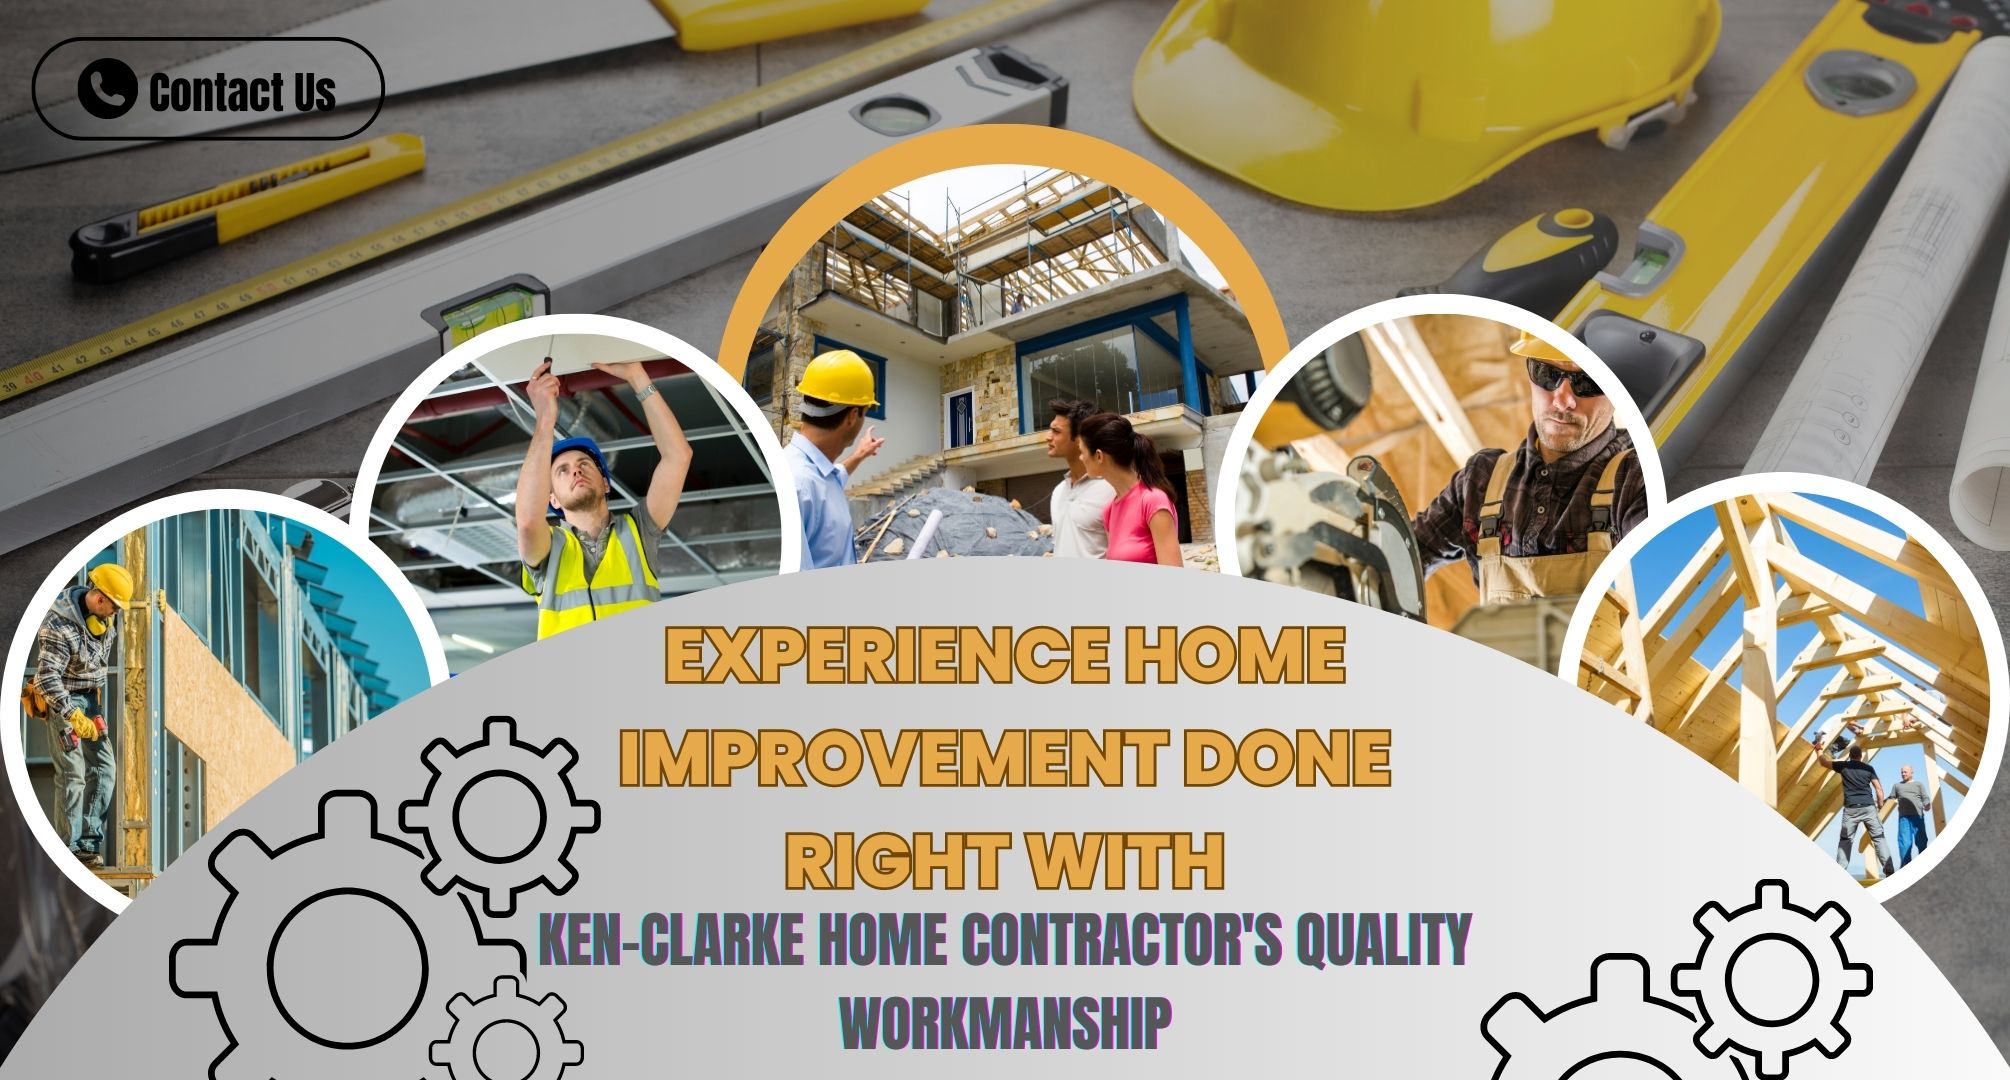 Experience Home Improvement Done Right with Ken-Clarke Home Contractor's Quality Workmanship